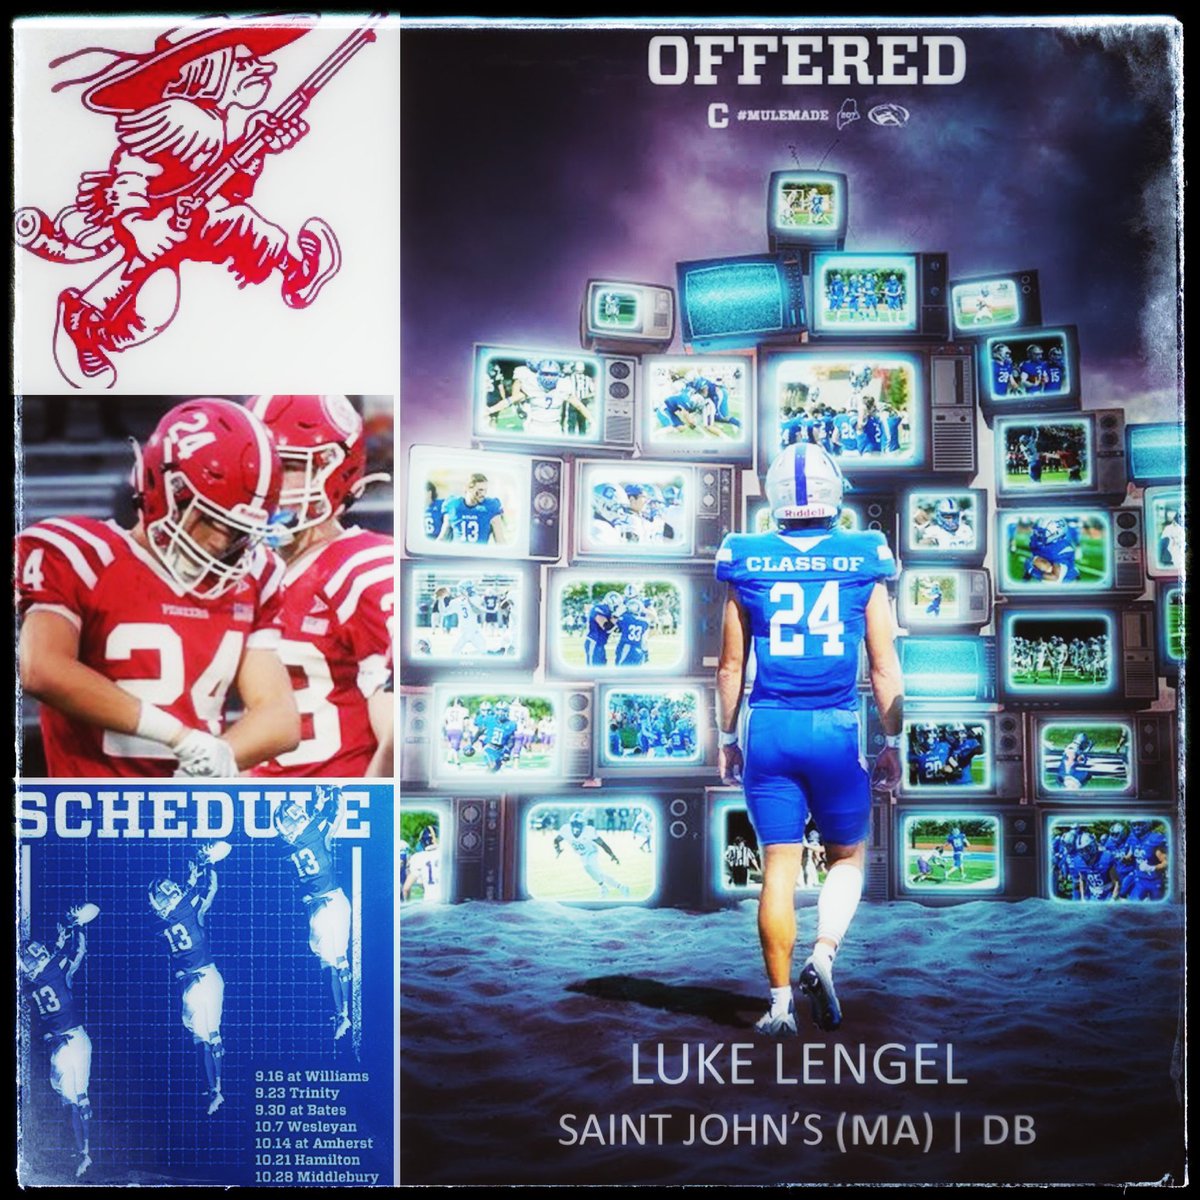 #TheSIX
Congrats to @SaintJohnsFB’s @LengelLuke on his ➍ 𝐍𝐄𝐒𝐂𝐀𝐂 offer✨
“After speaking with @Coach_JWalsh, I am happy to share that I have been offered by @Colby_Football!
#mulemade”